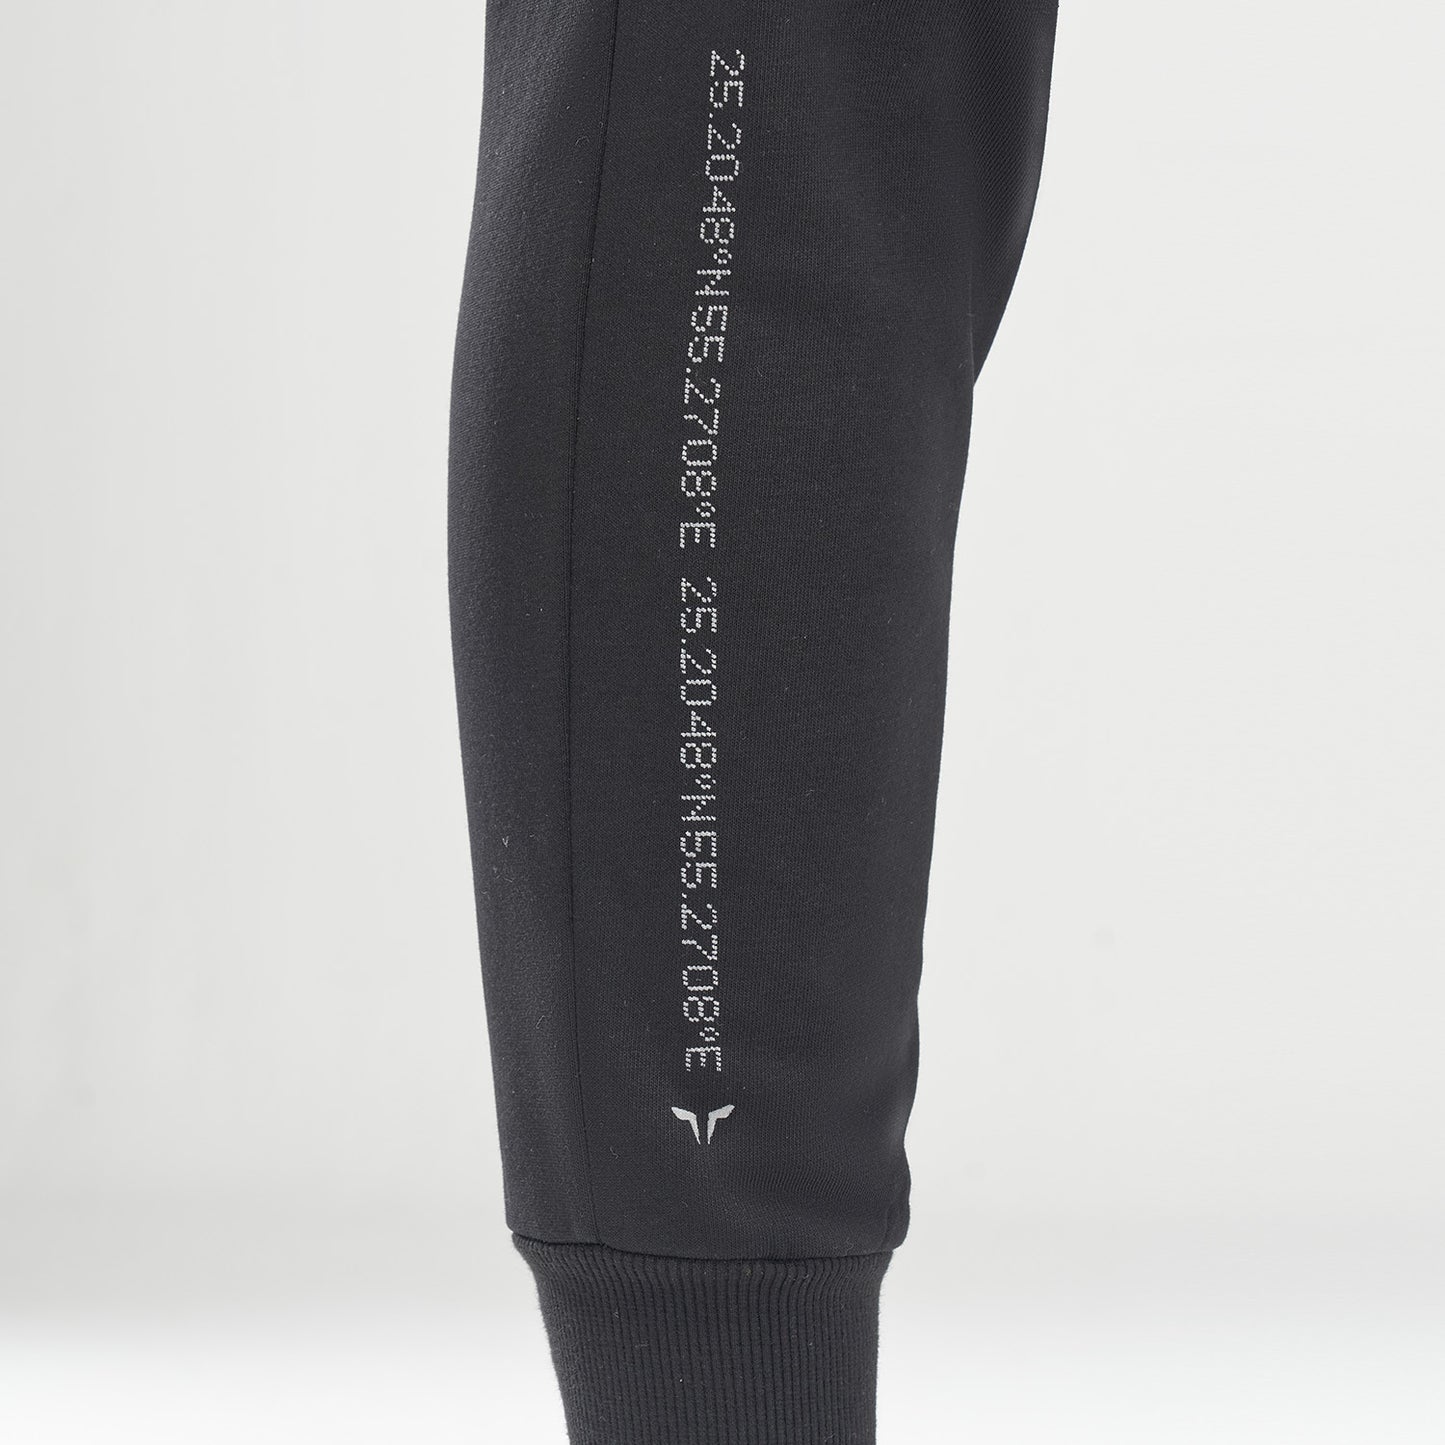 AE | Code Relaxed Joggers - Black | Workout Pants Women | SQUATWOLF